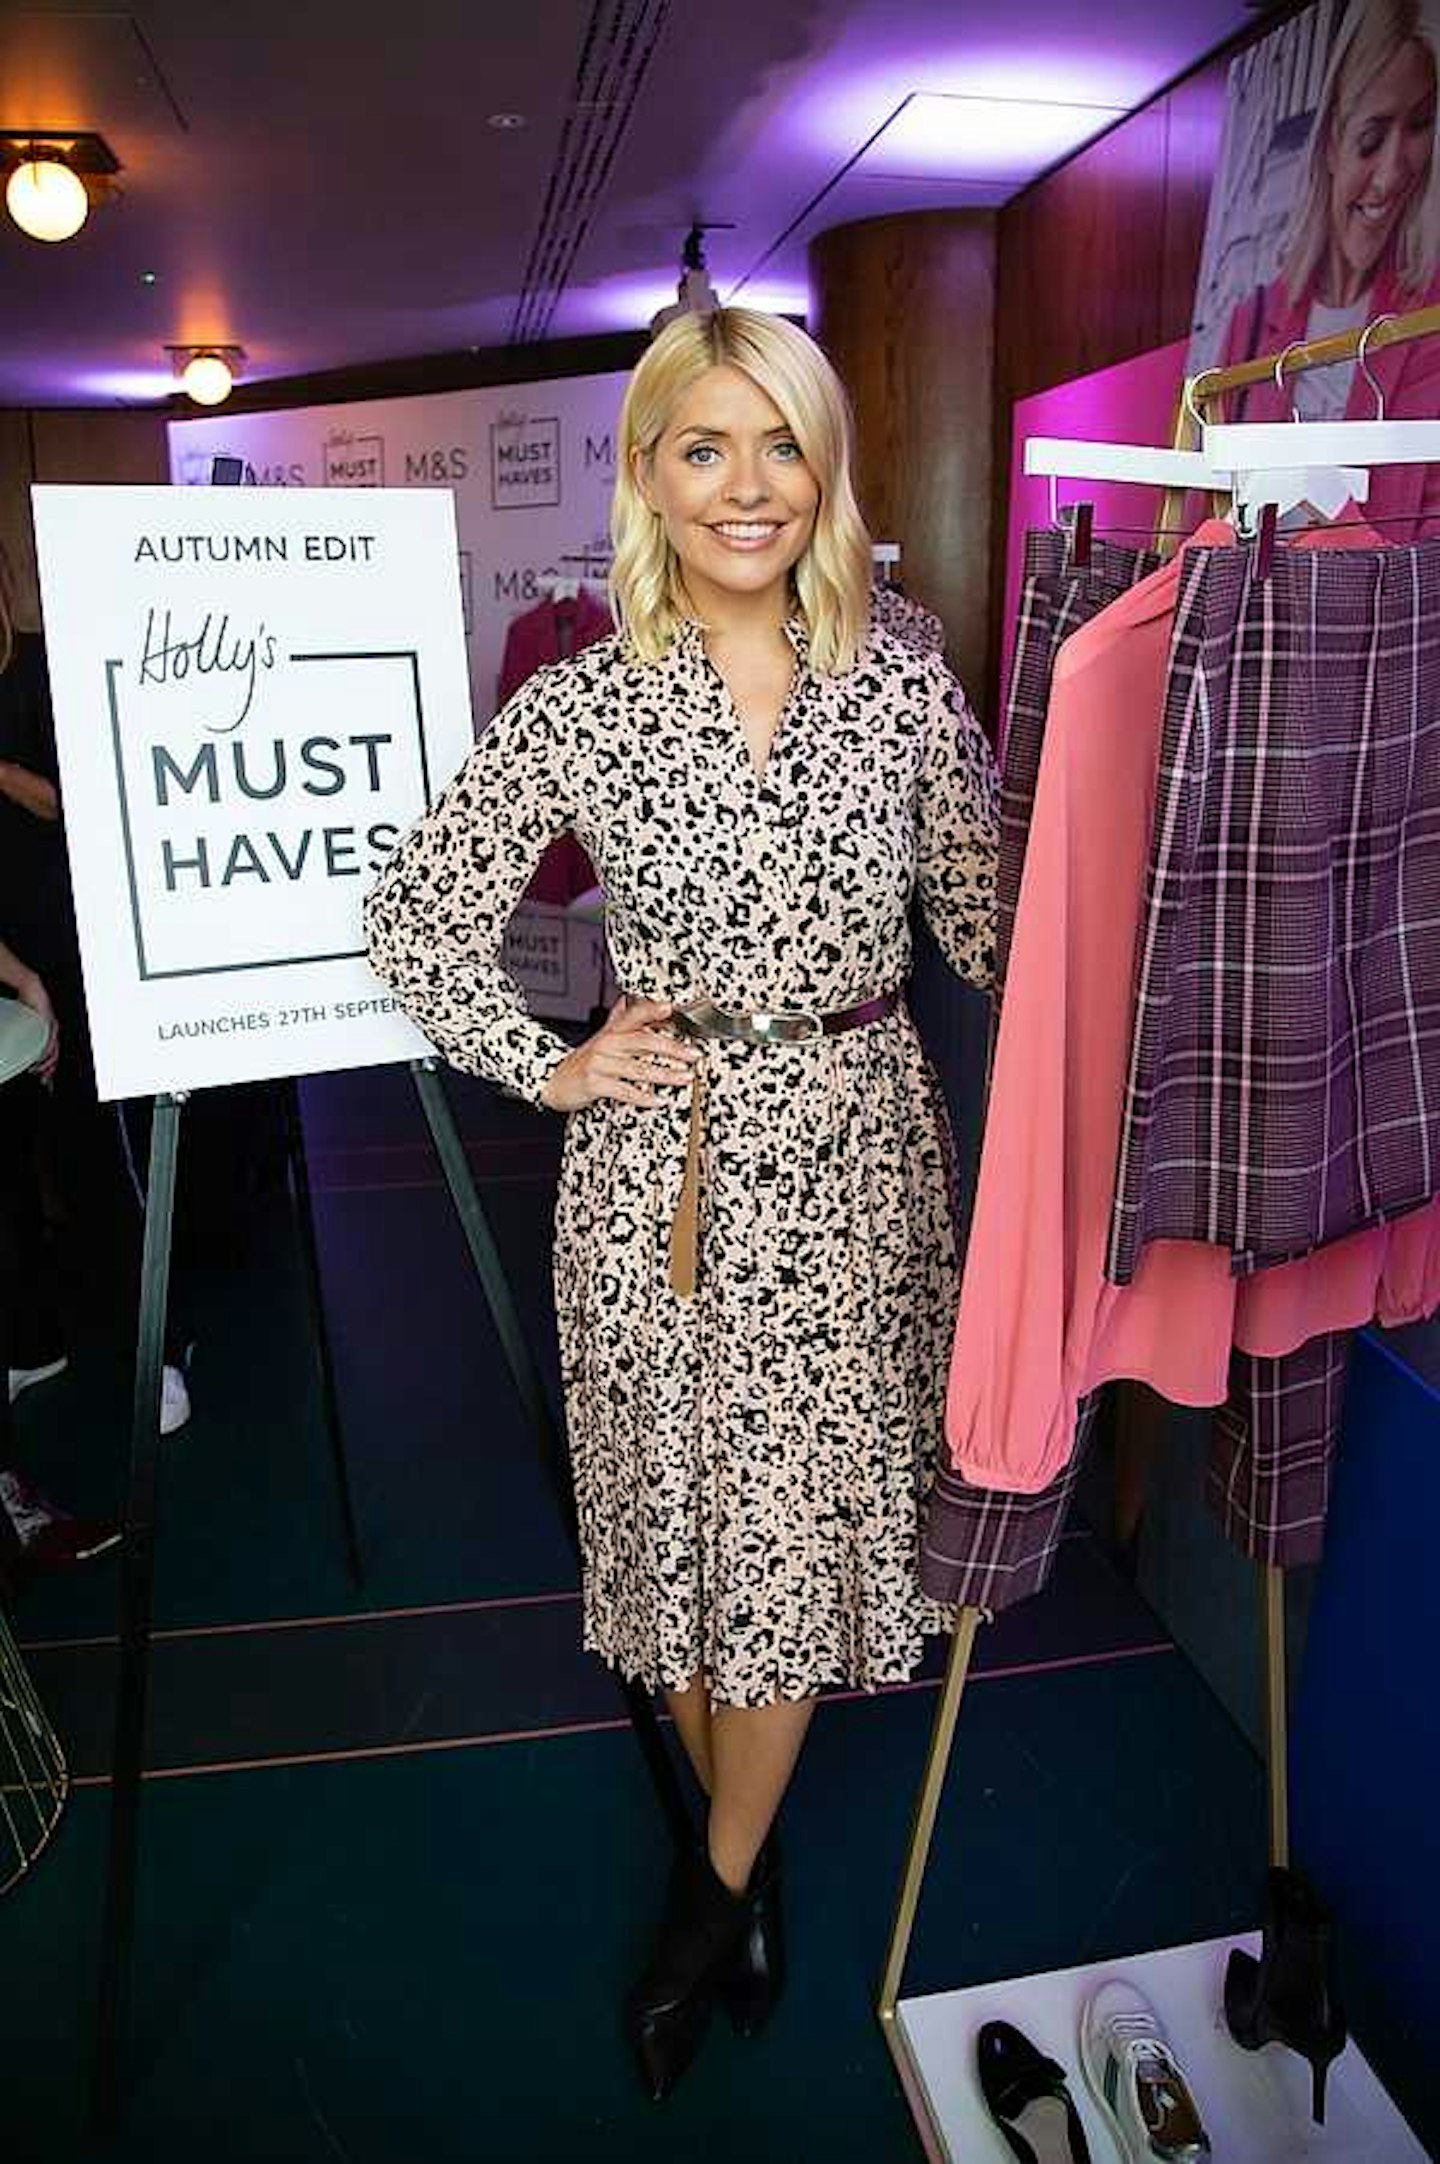 This leopard print dress was an instant hit from her September M&S edit 